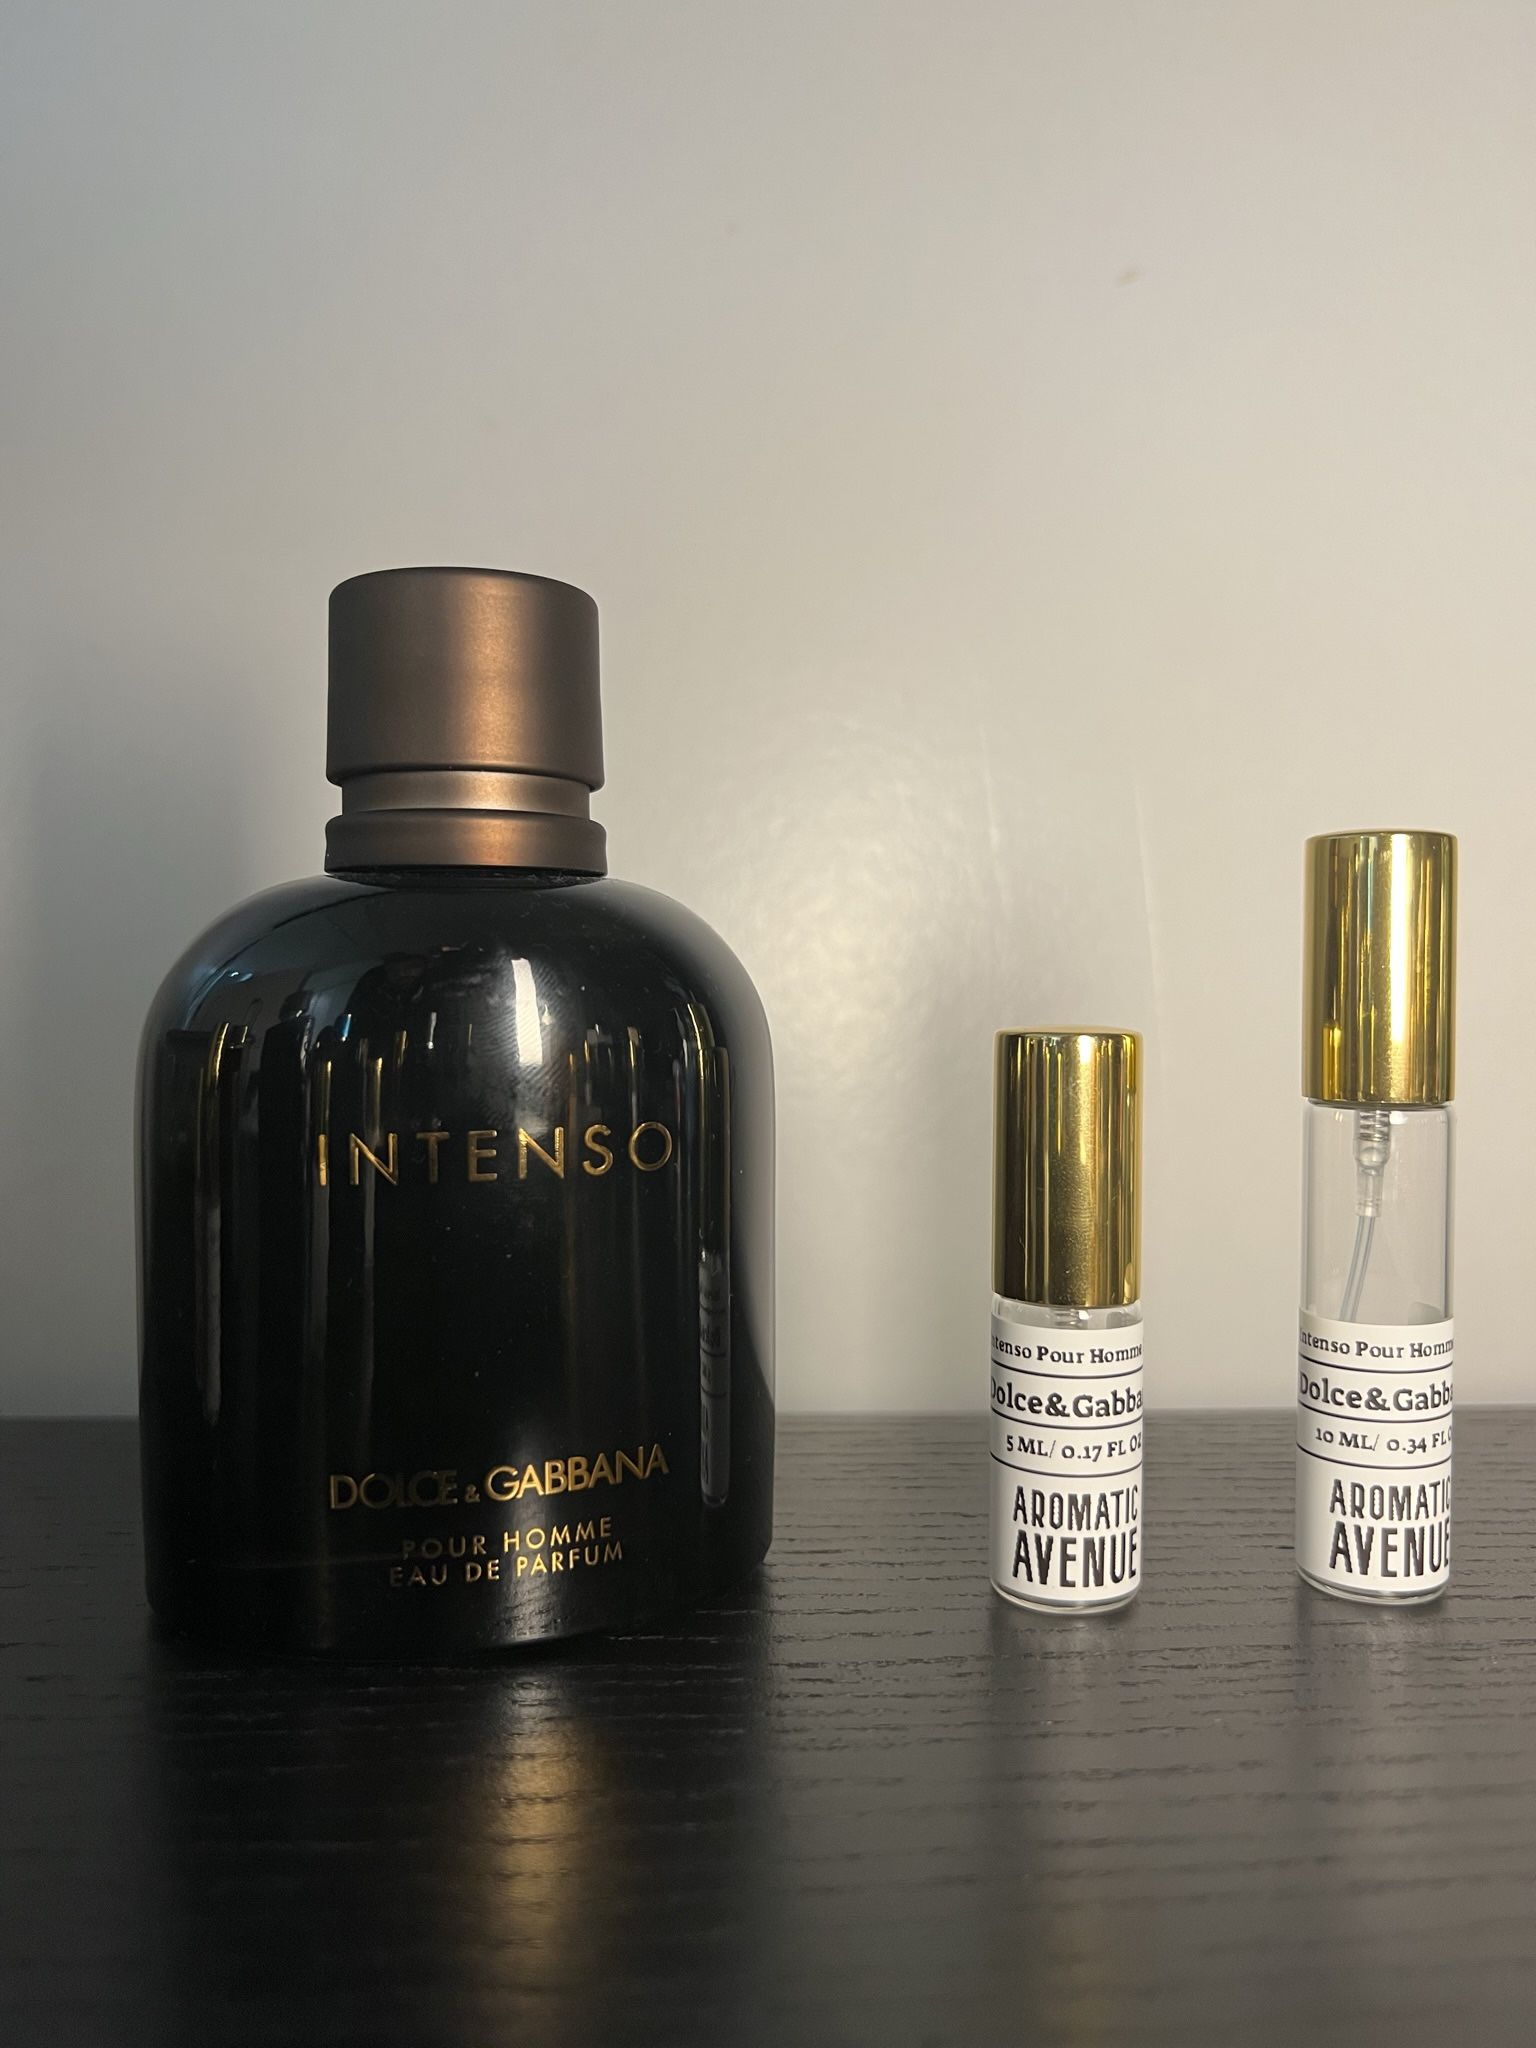 Dolce & Gabbana Intenso Pour Homme EDP Fragrance Glass Decant Sample Spray Travel Size Vial 10ML